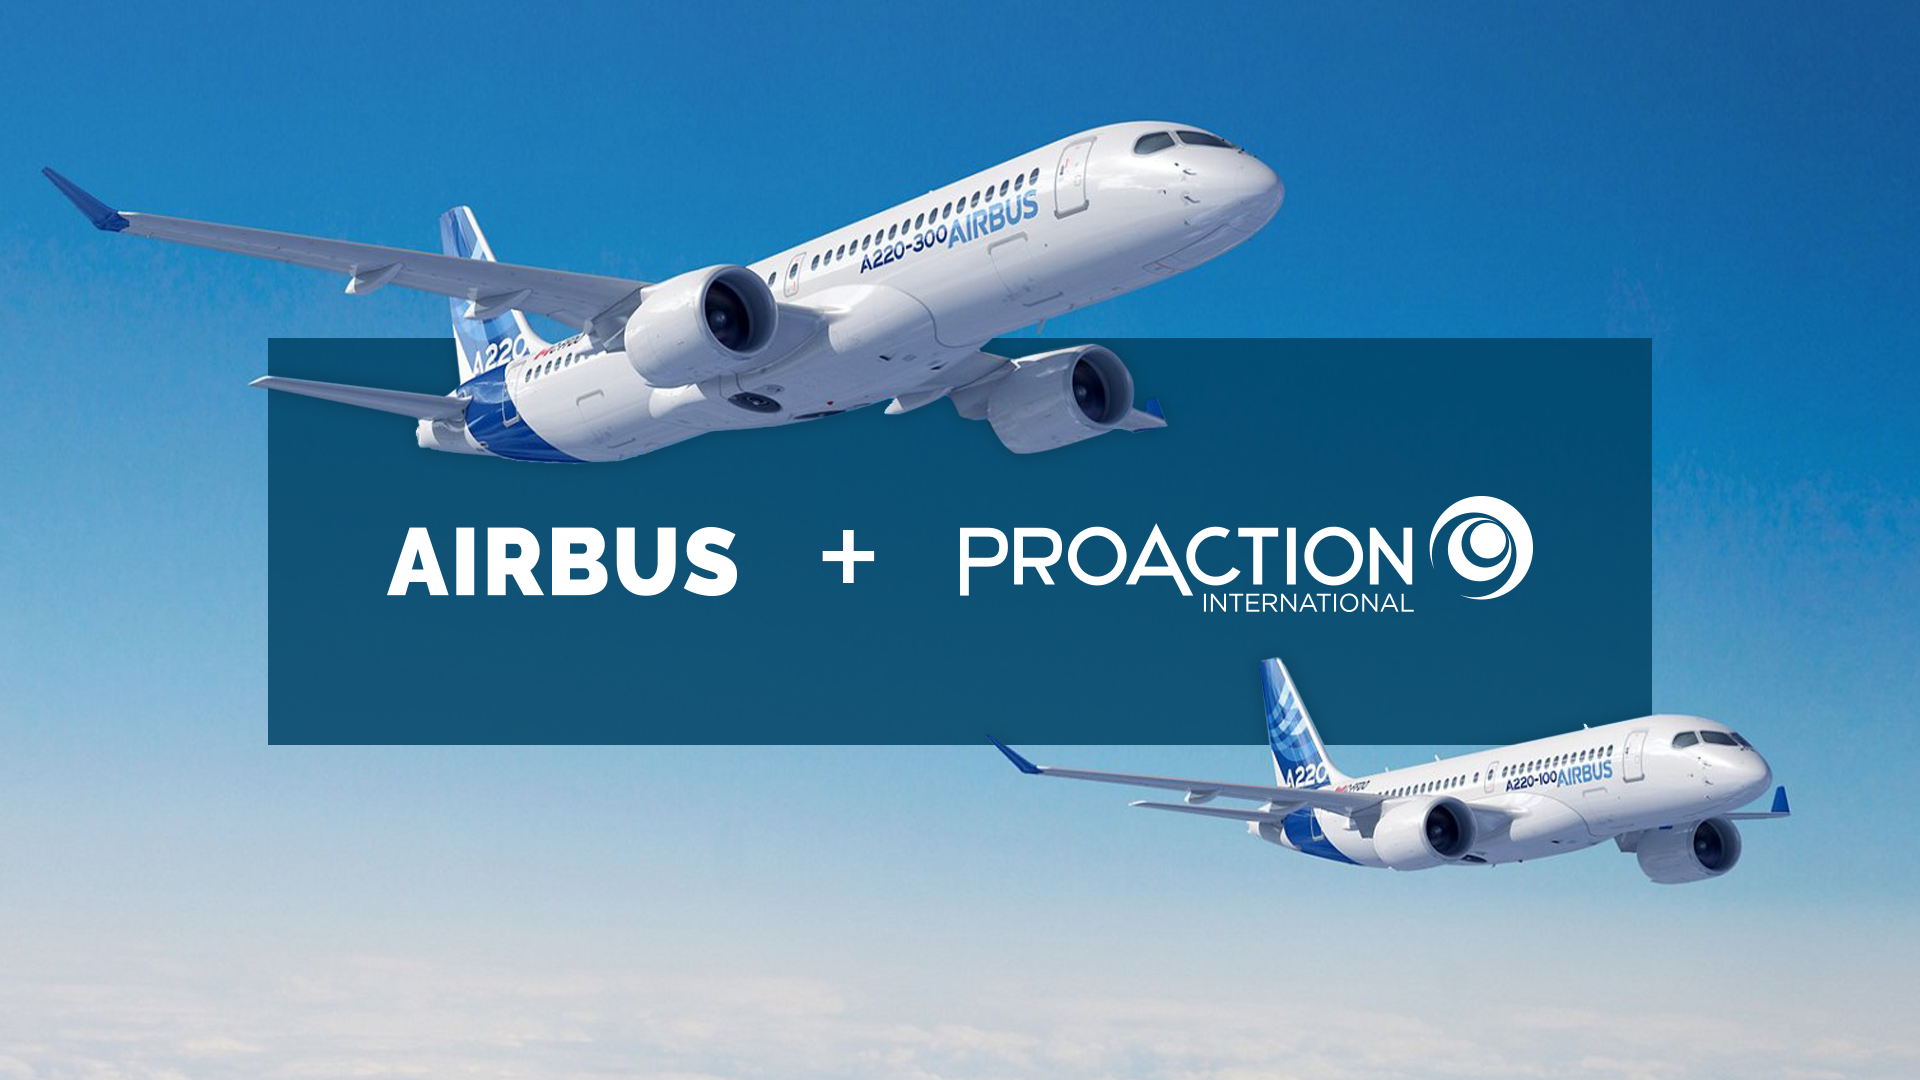 AIRBUS transforms its management culture and boosts performance at its Mirabel plant with Proaction International